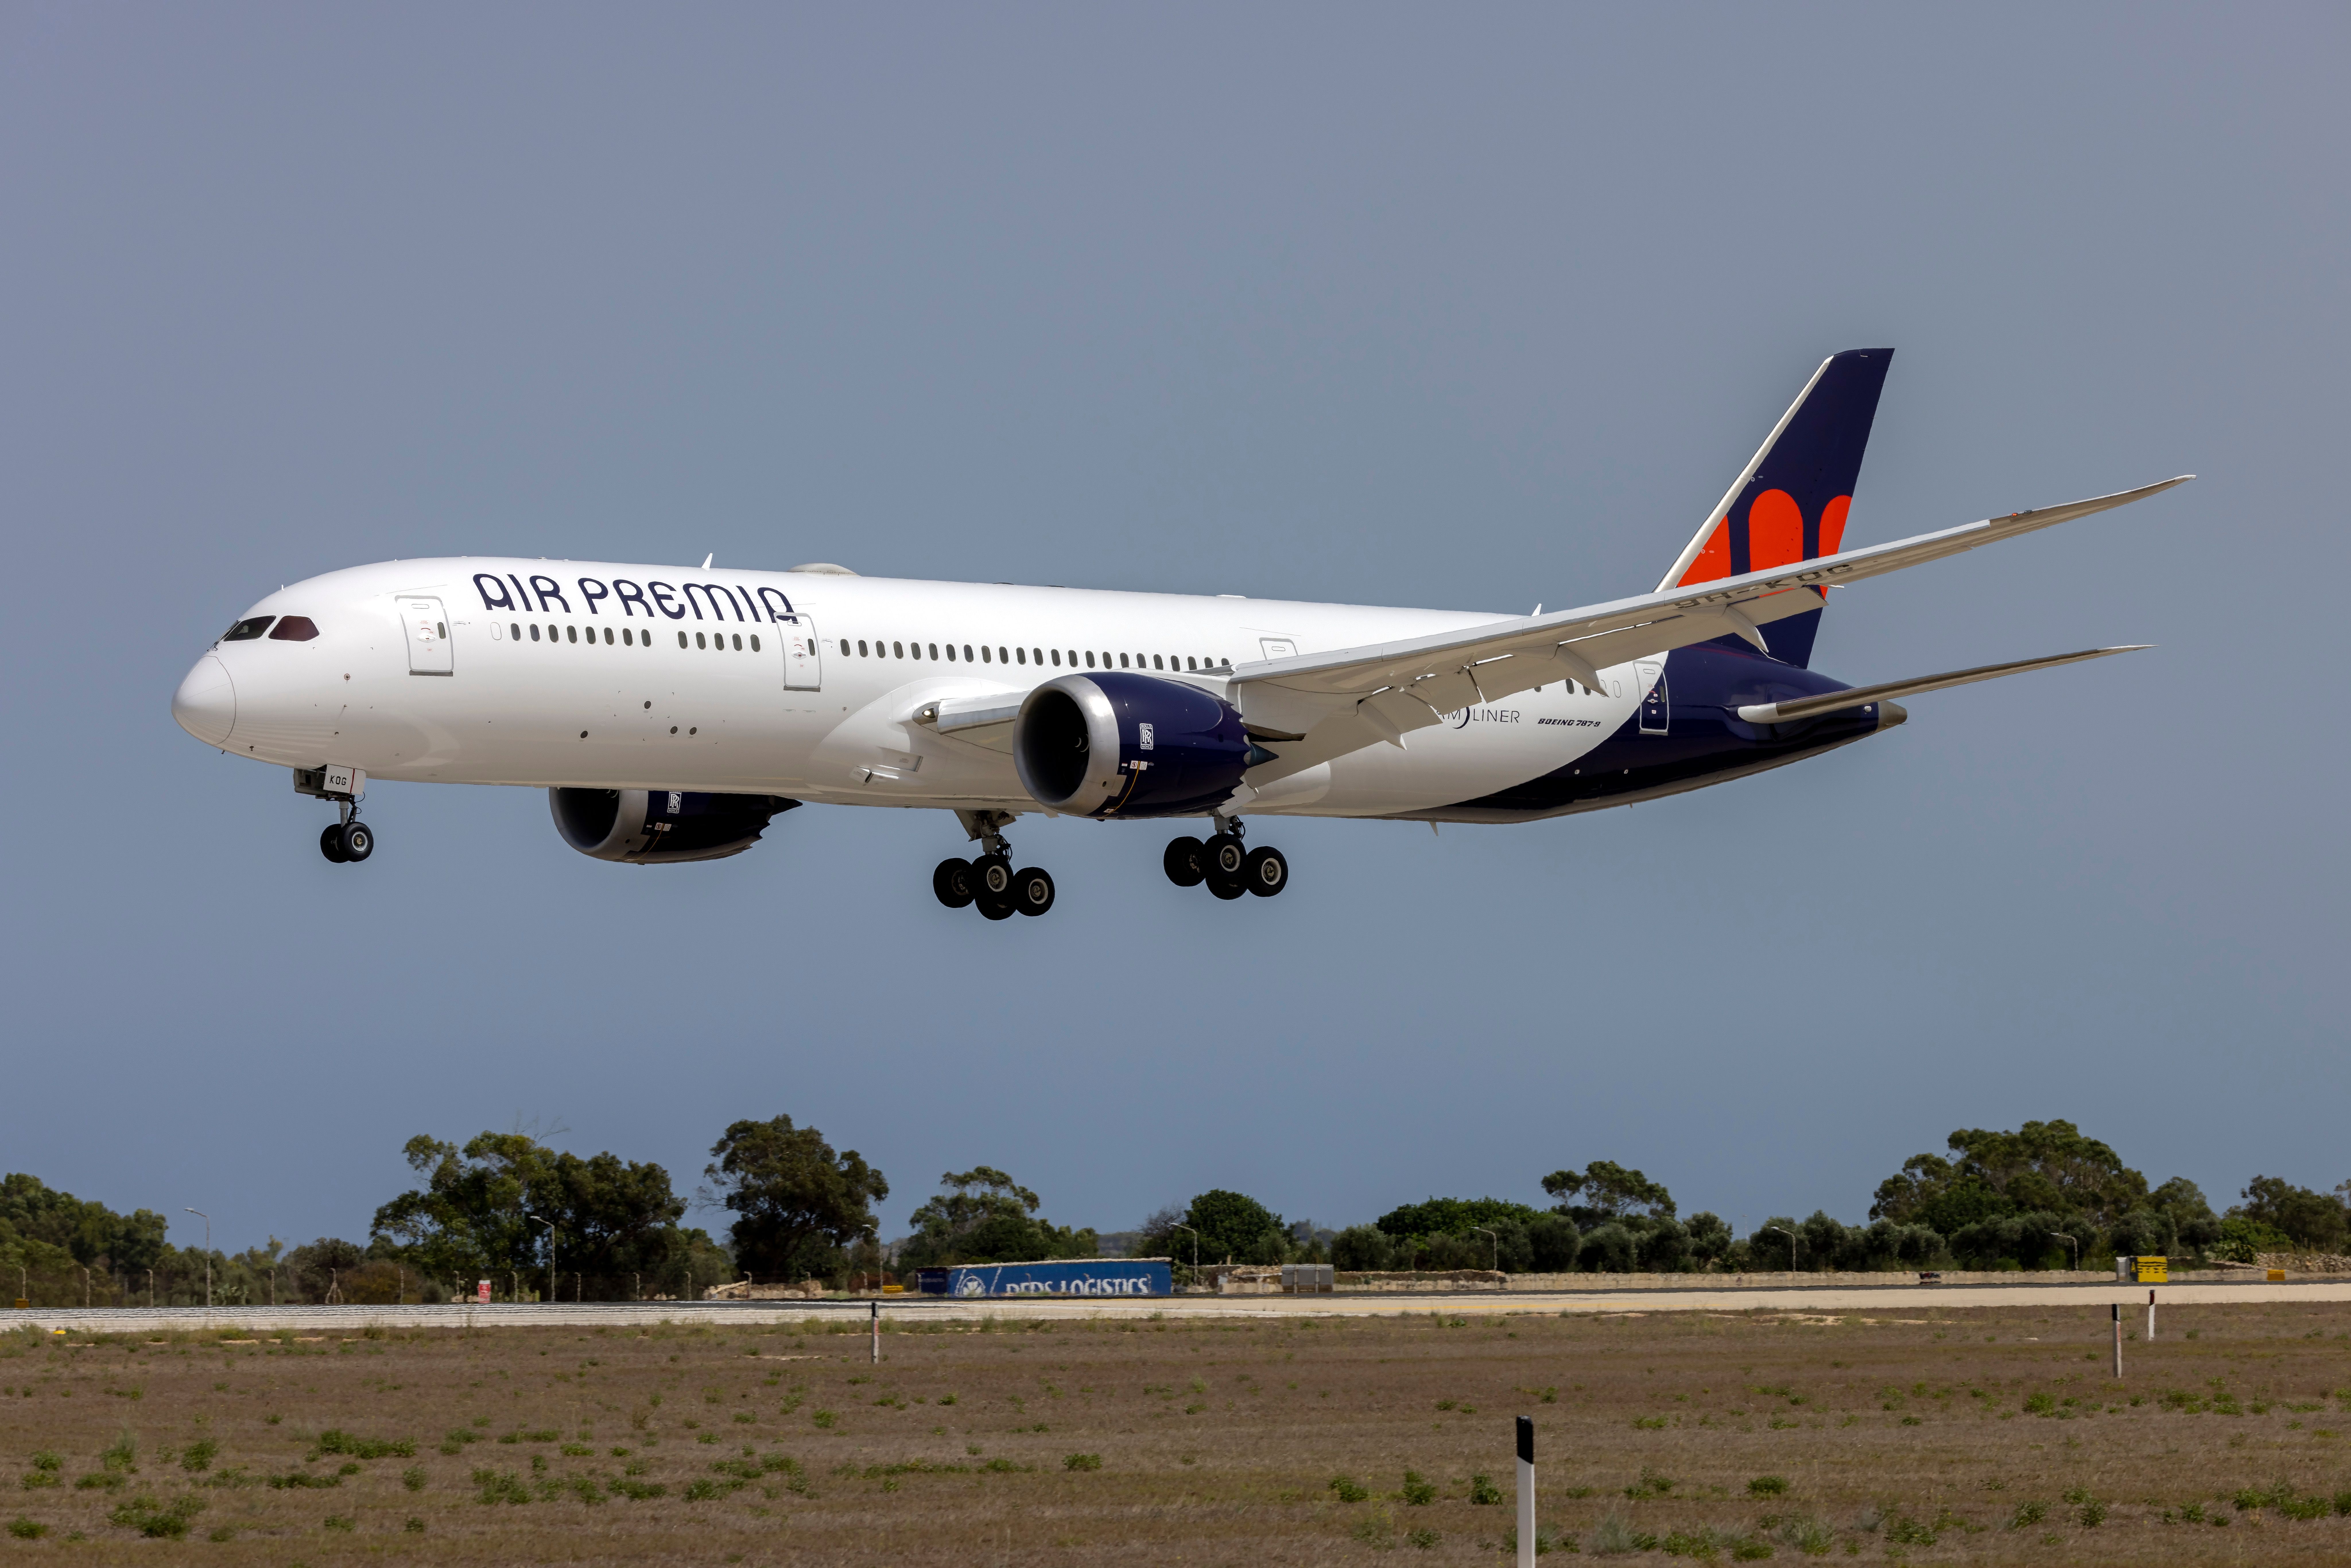 An Air Premia Boeing 787 about to land.